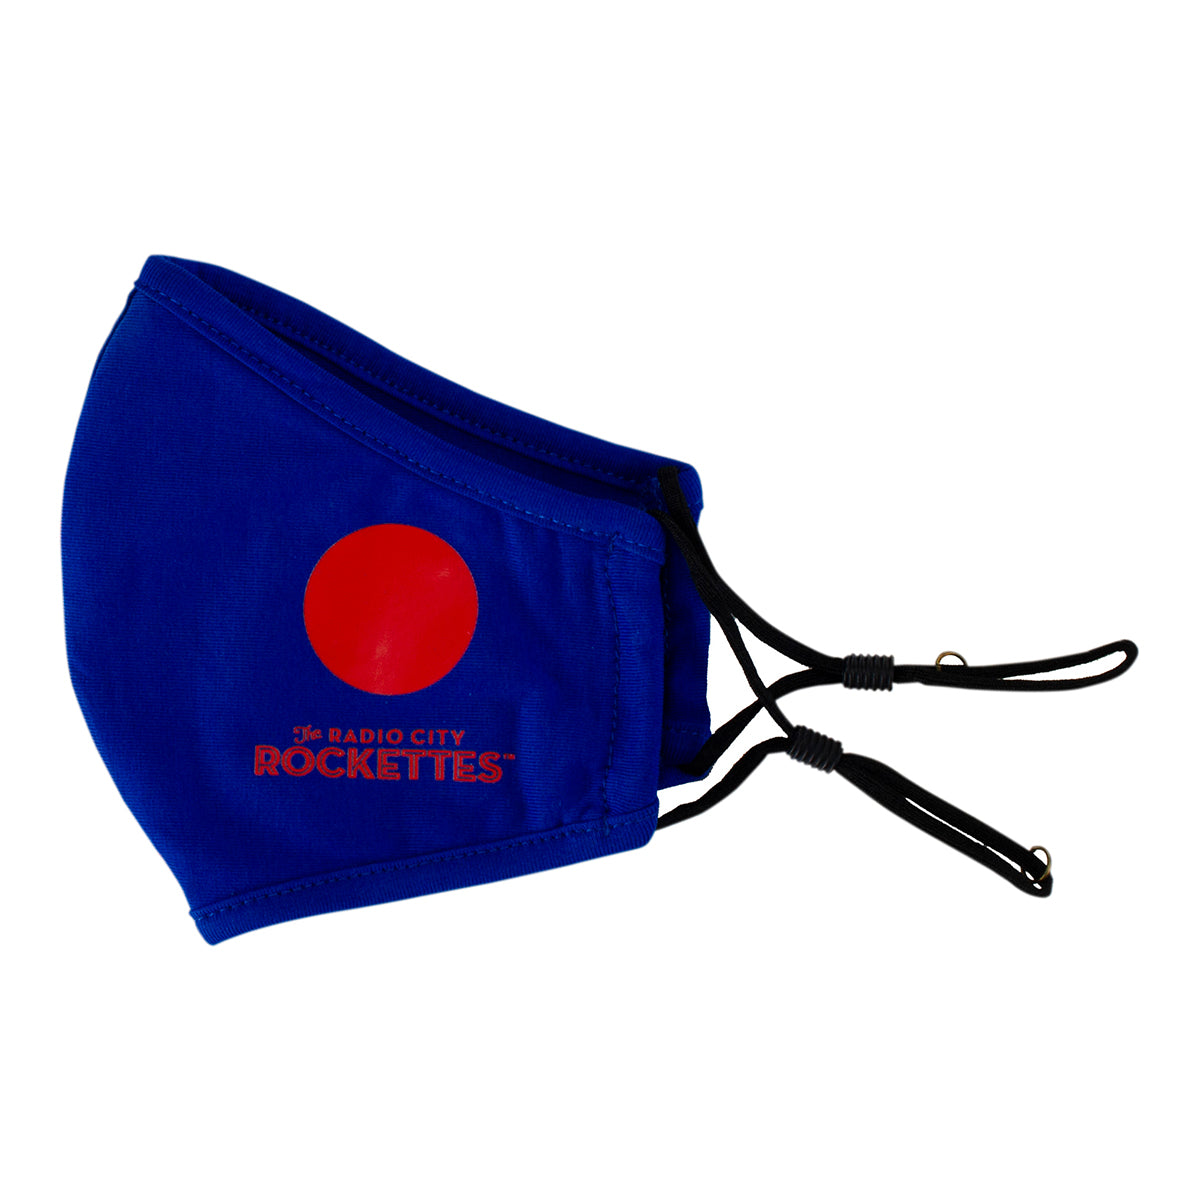 Blue and red face mask from side view, with Radio City Rockettes Christmas Spectacular branding